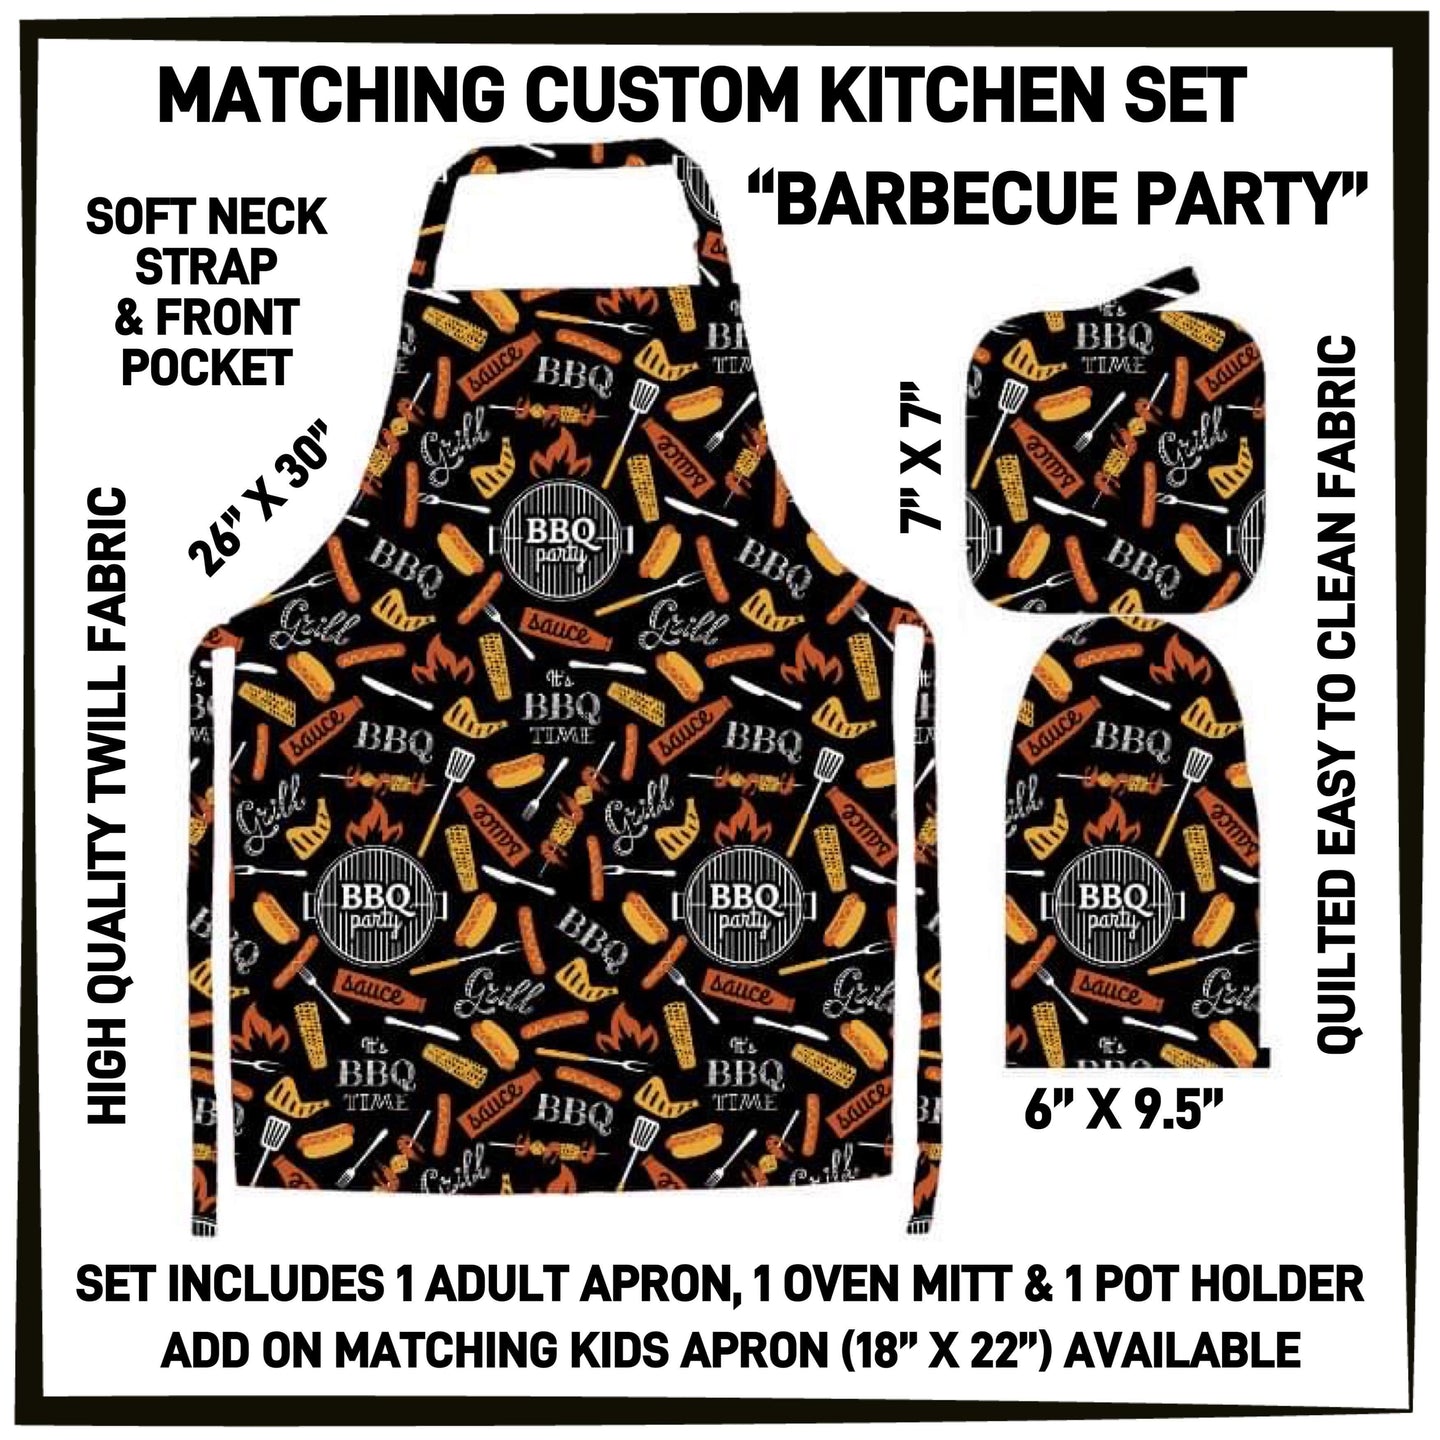 RTS - Barbecue Party Matching Kitchen Set